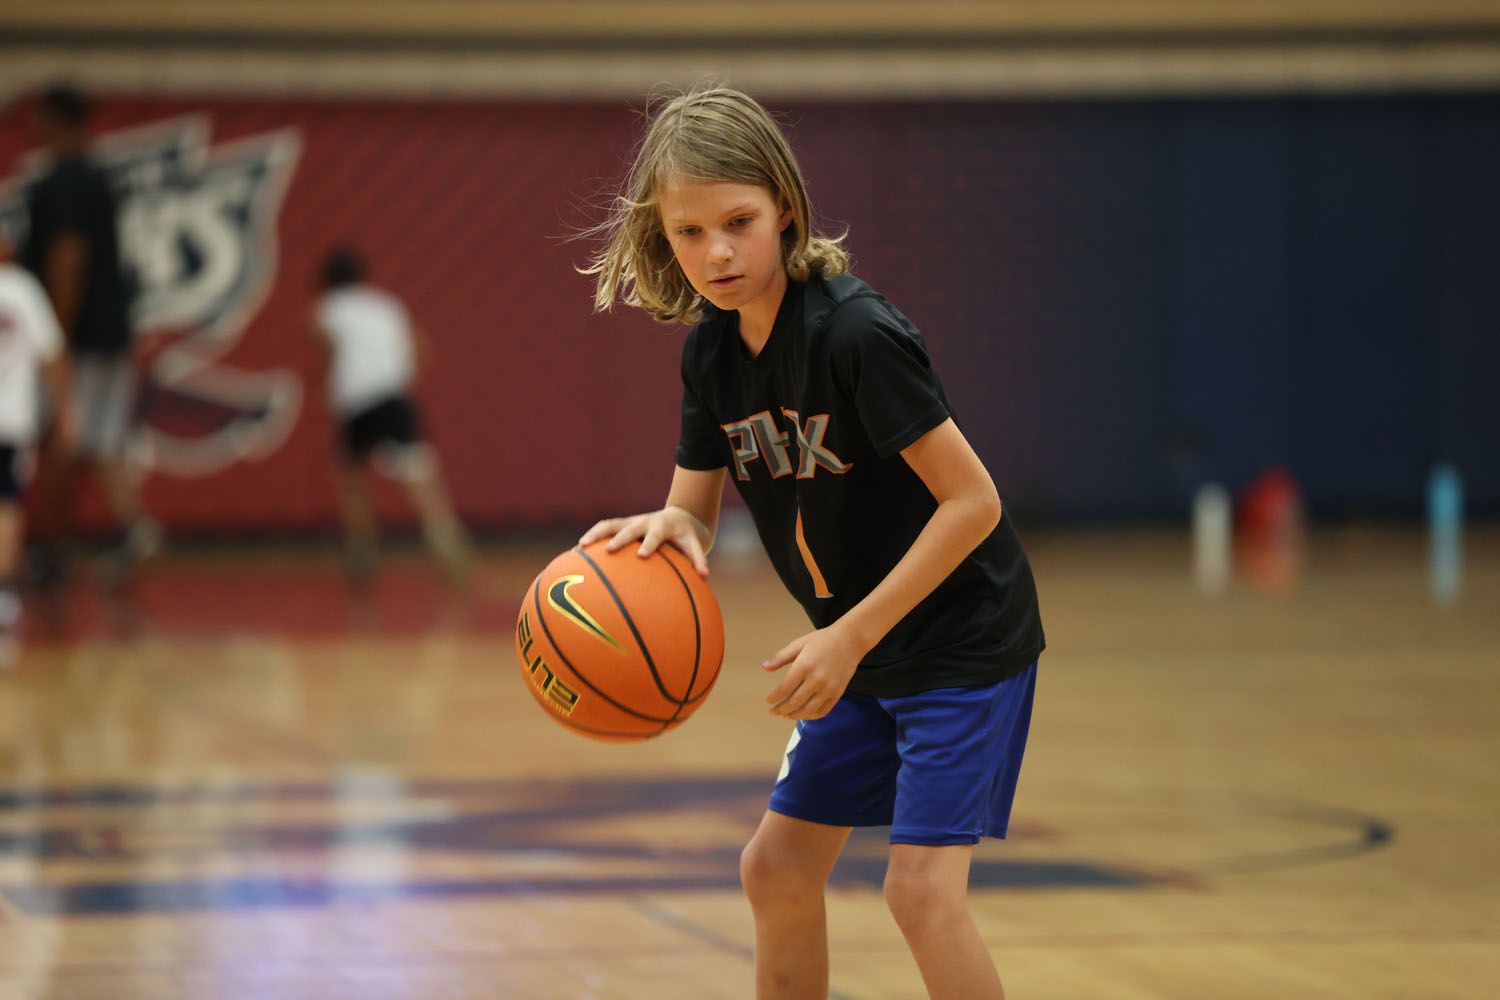 Young camper dribbling the ball